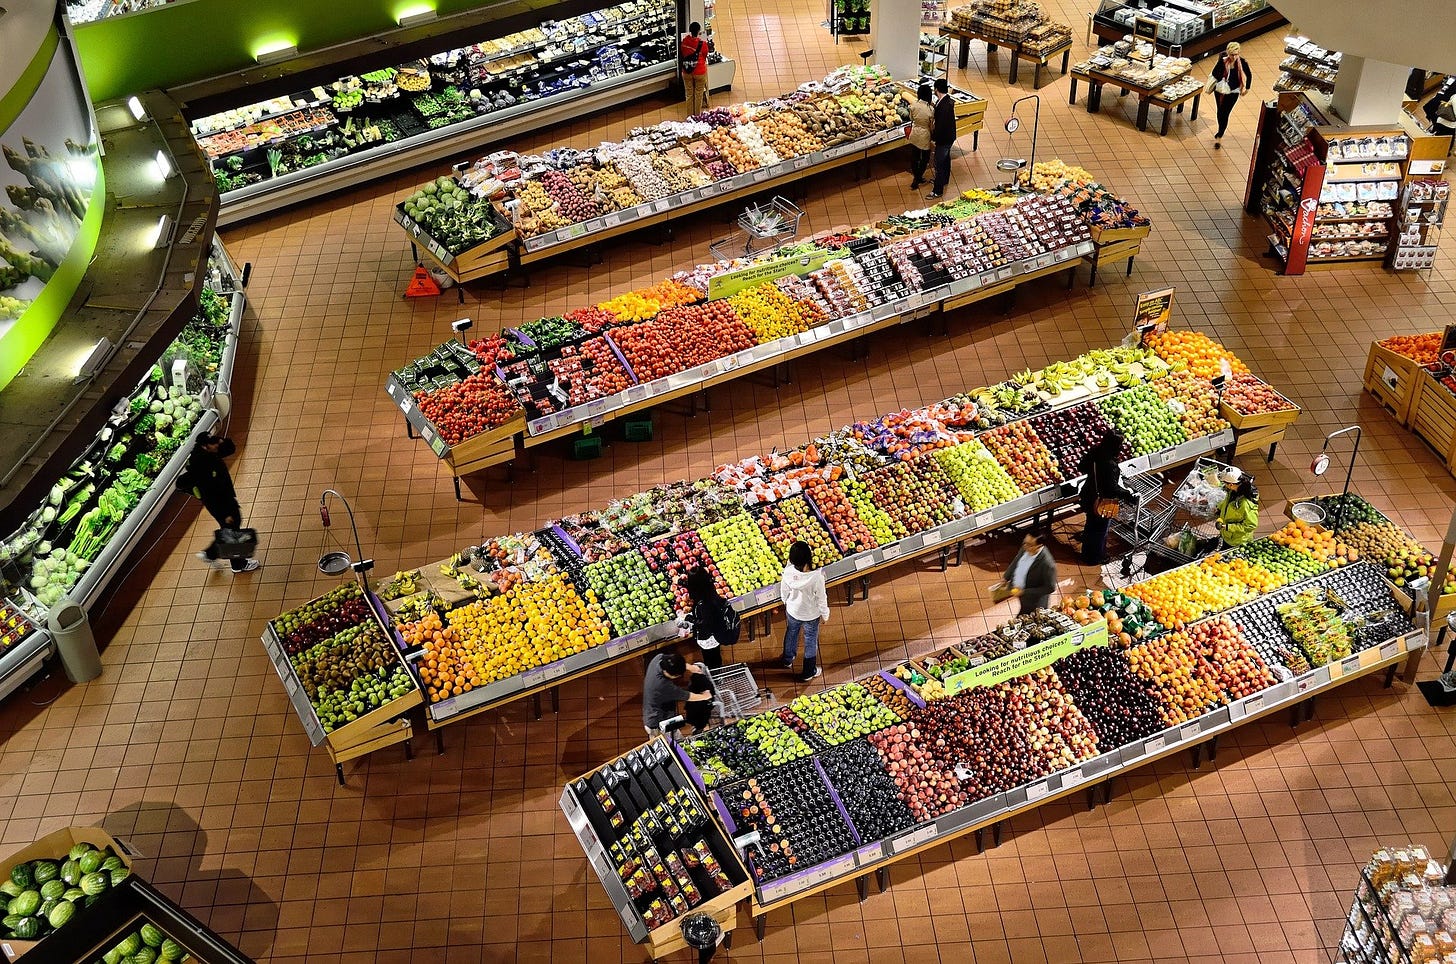 Looking down on the produce section of a supermarket. So much abundance!